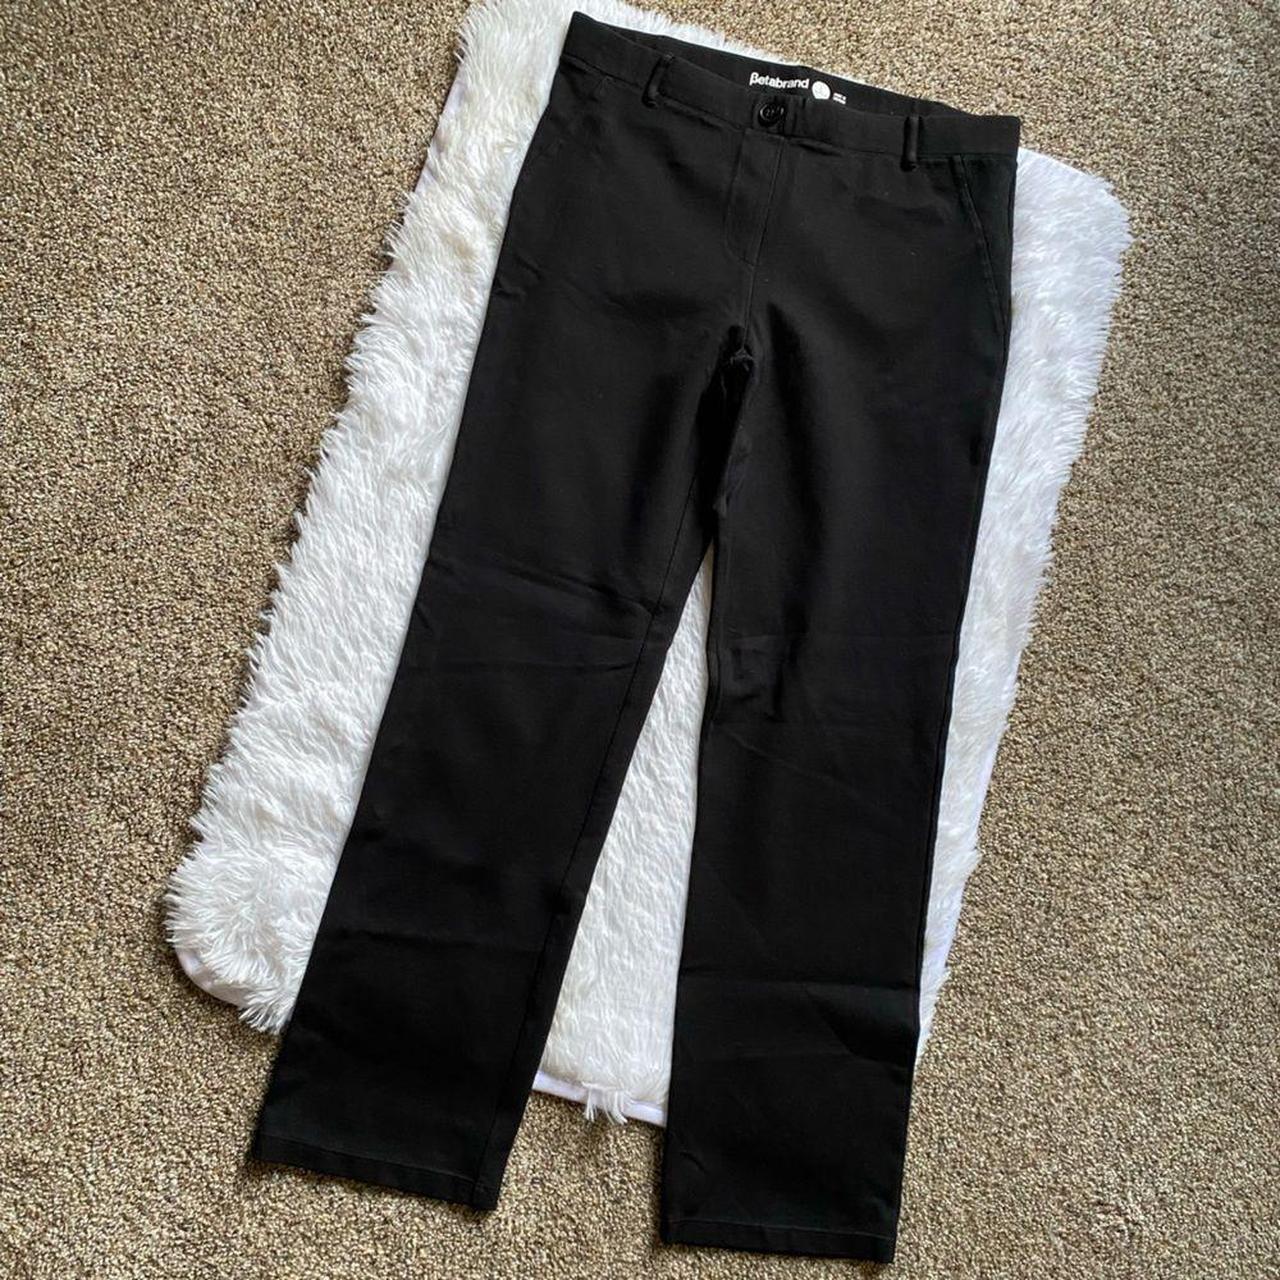 Betabrand Band Dress Pants for Women